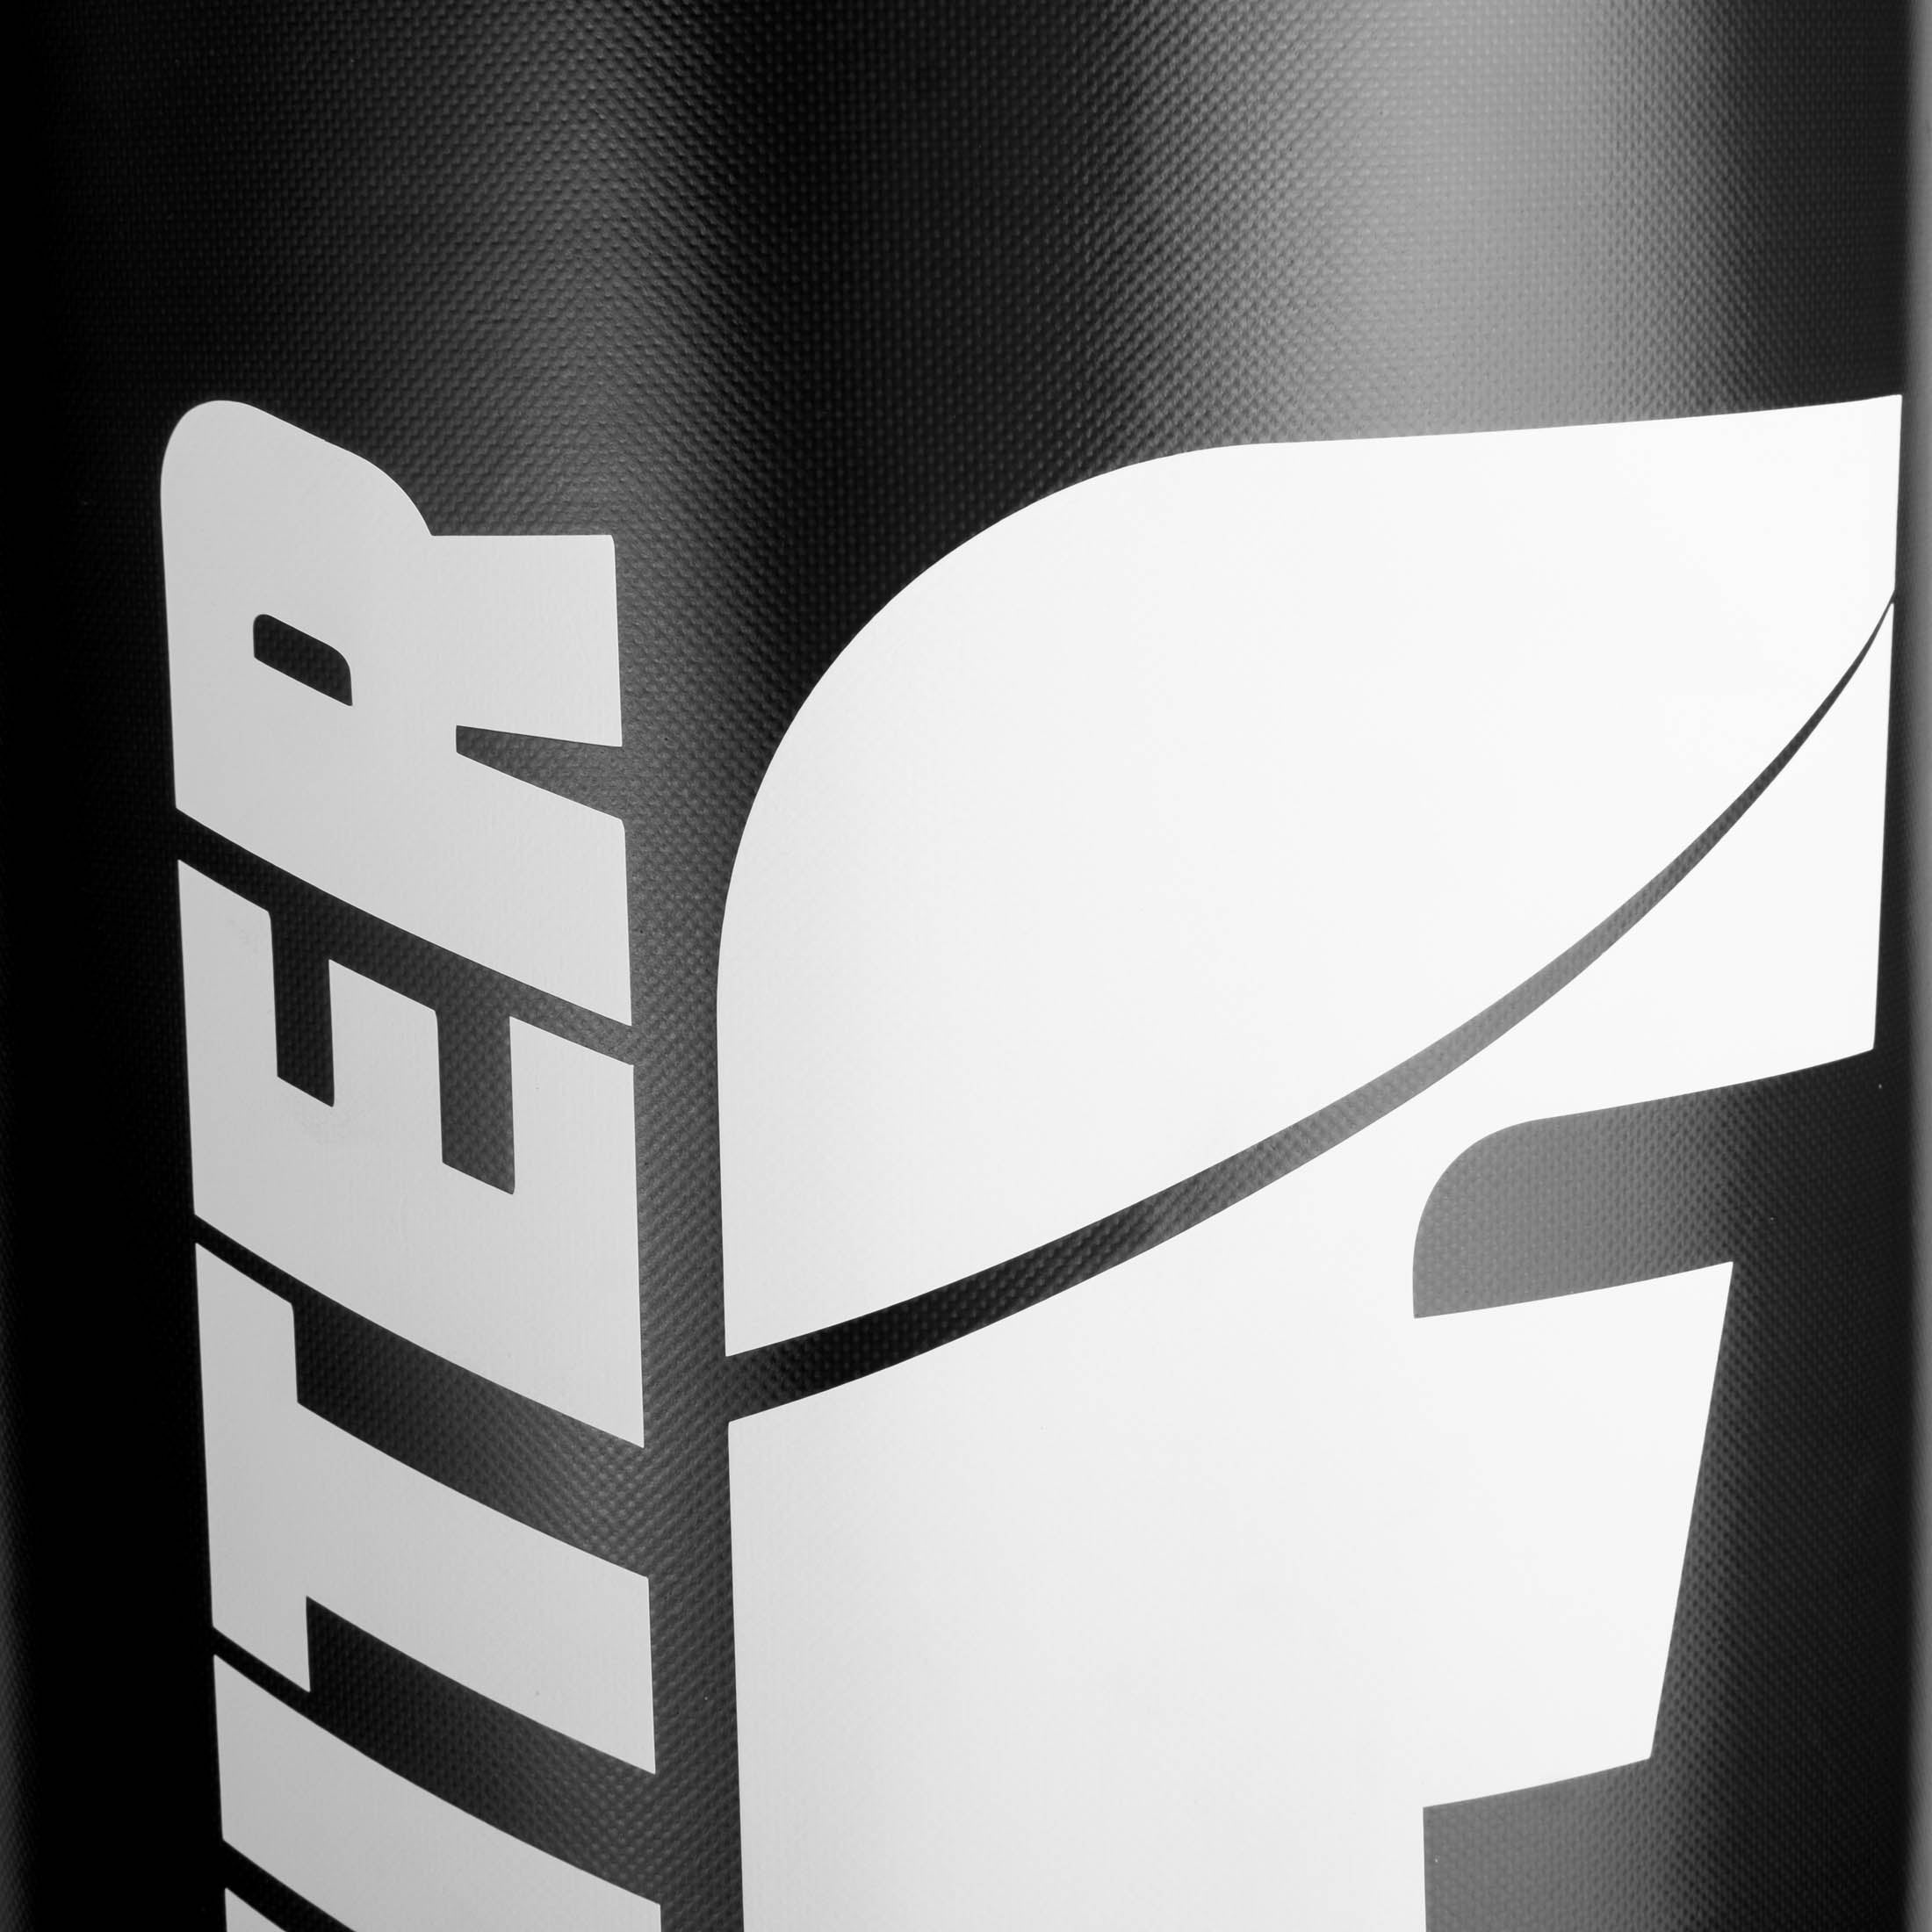 Fighter Free-Standing Boxing Bag YOUNG - black/white